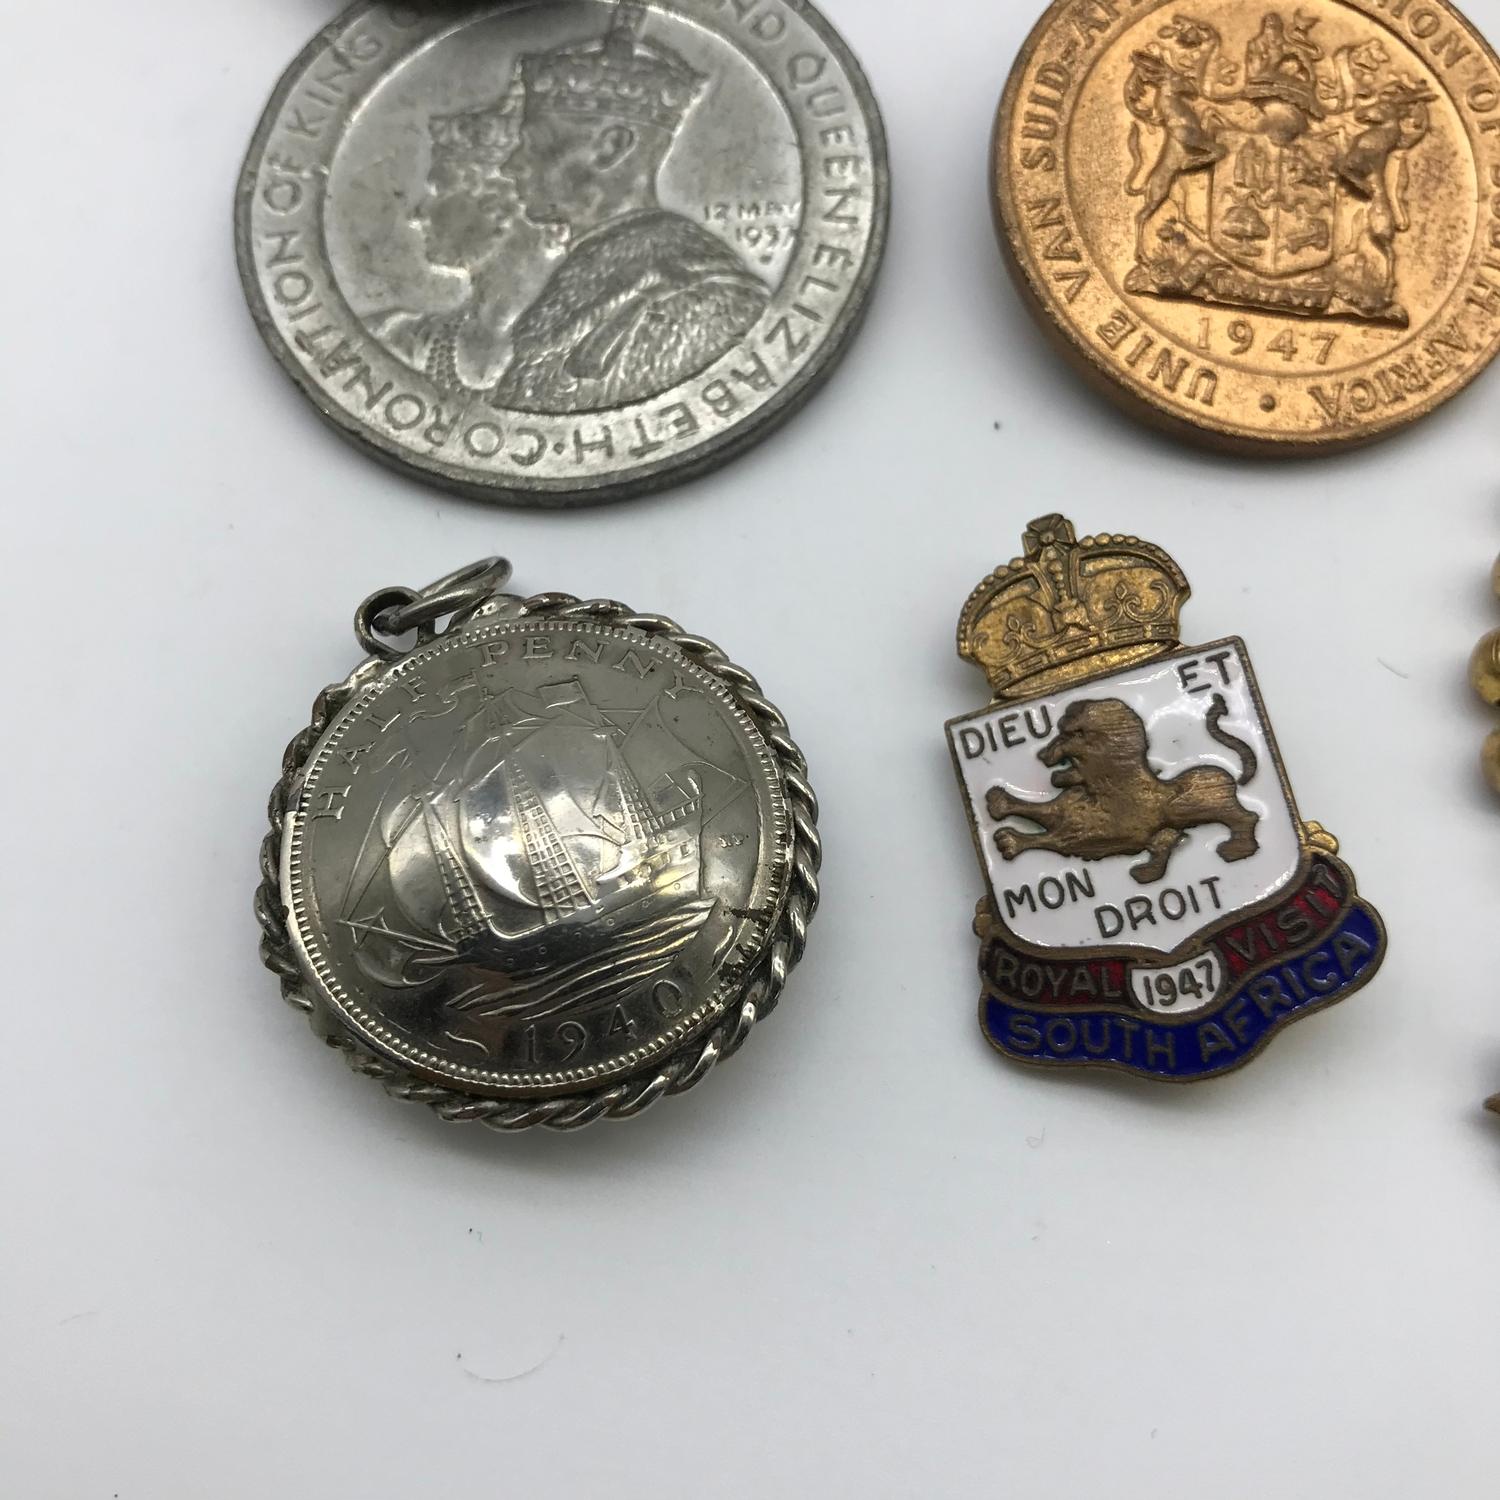 A Lot of two commemorative medals, 1940 silver coin pendant, Royal Visit South Africa 1947 badge and - Image 2 of 4